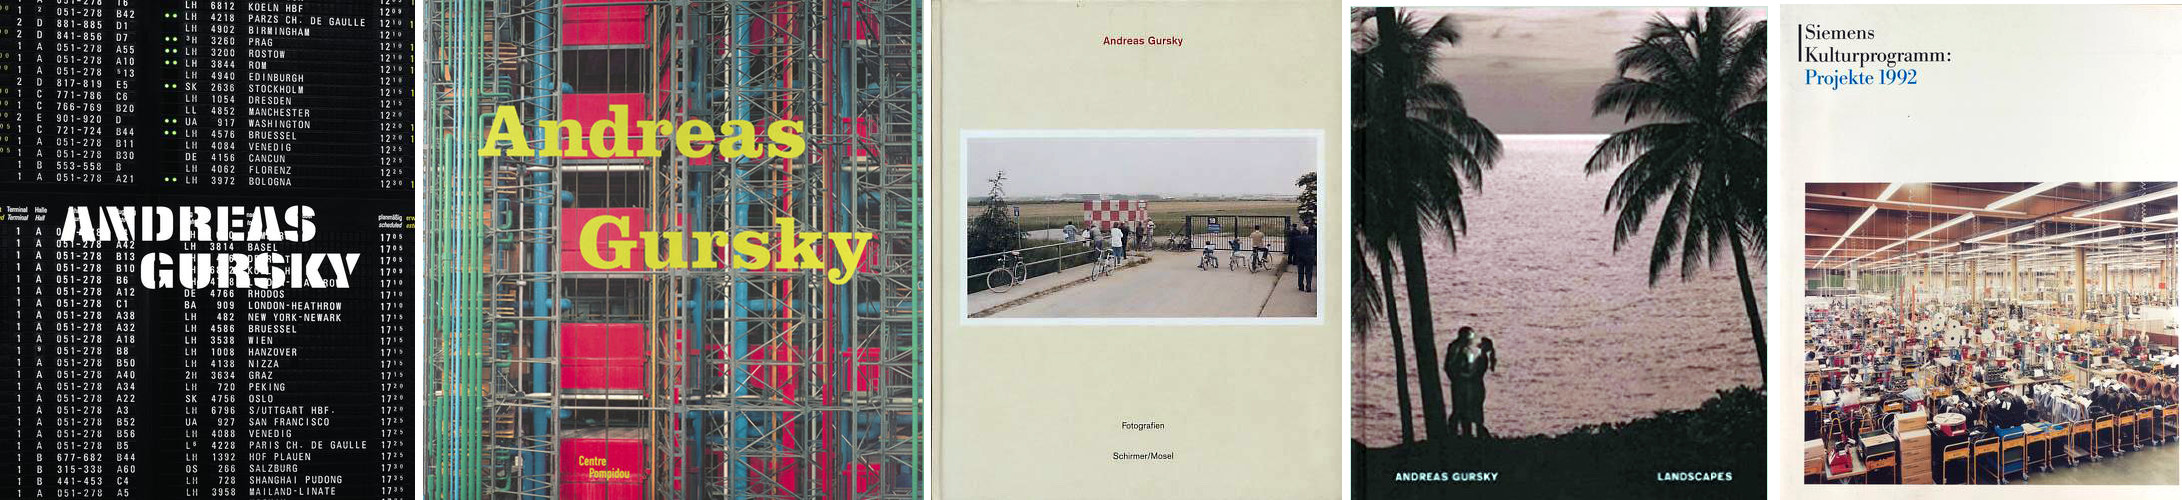 Andreas Gursky books iFocus